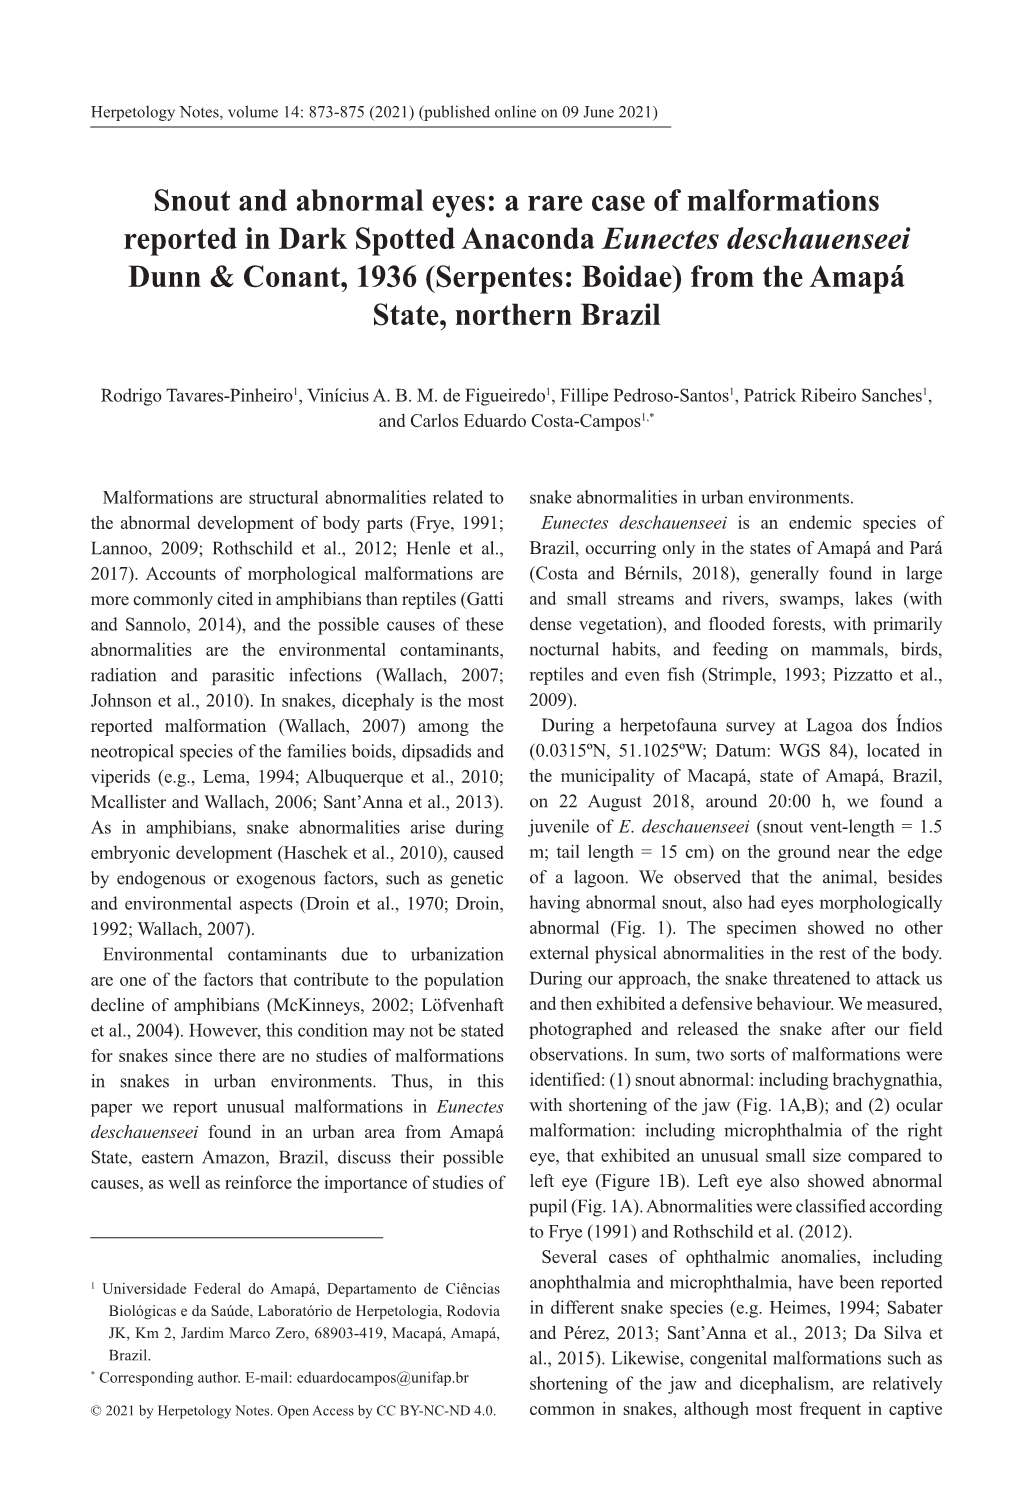 A Rare Case of Malformations Reported in Dark Spotted Anaconda Eunectes Deschauenseei Dunn & Conant, 1936 (Serpentes: Boidae) from the Amapá State, Northern Brazil